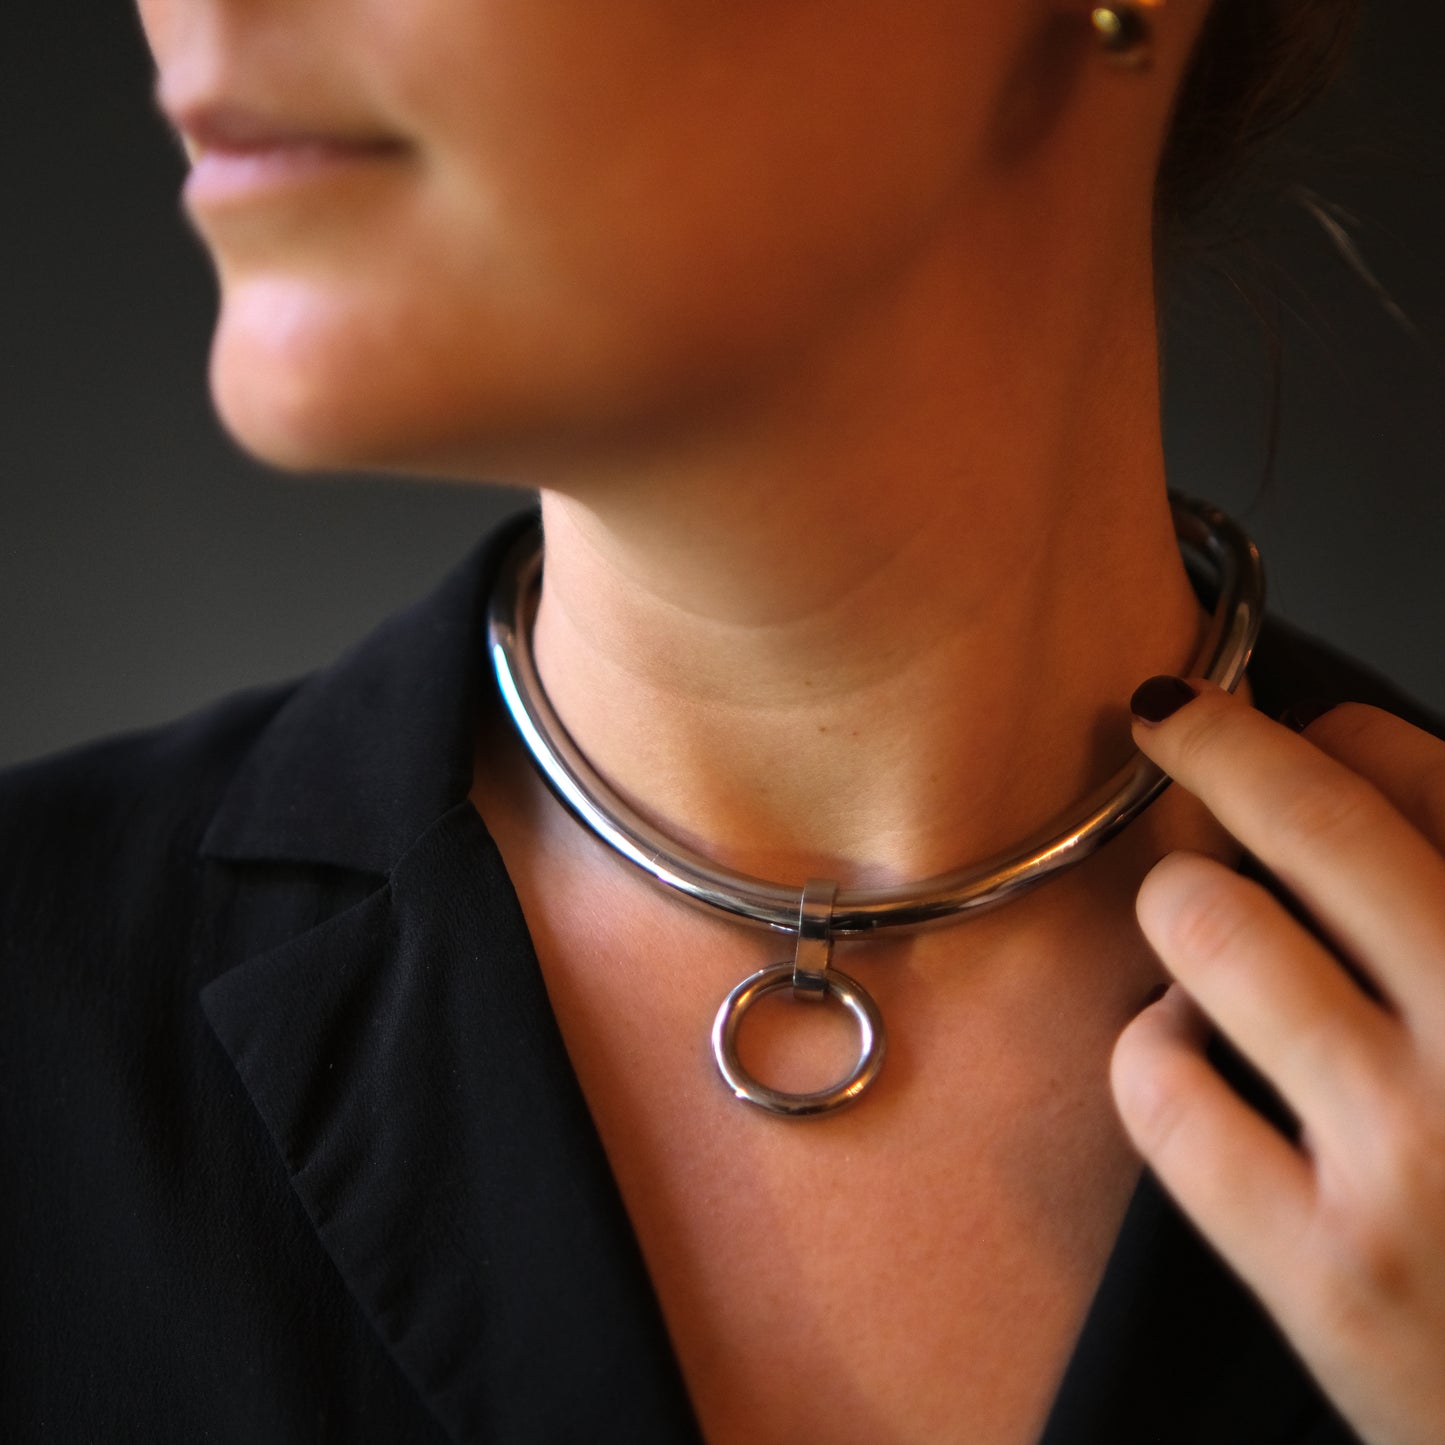 Ergonomically shaped eternity collar with ring and hexagonal key